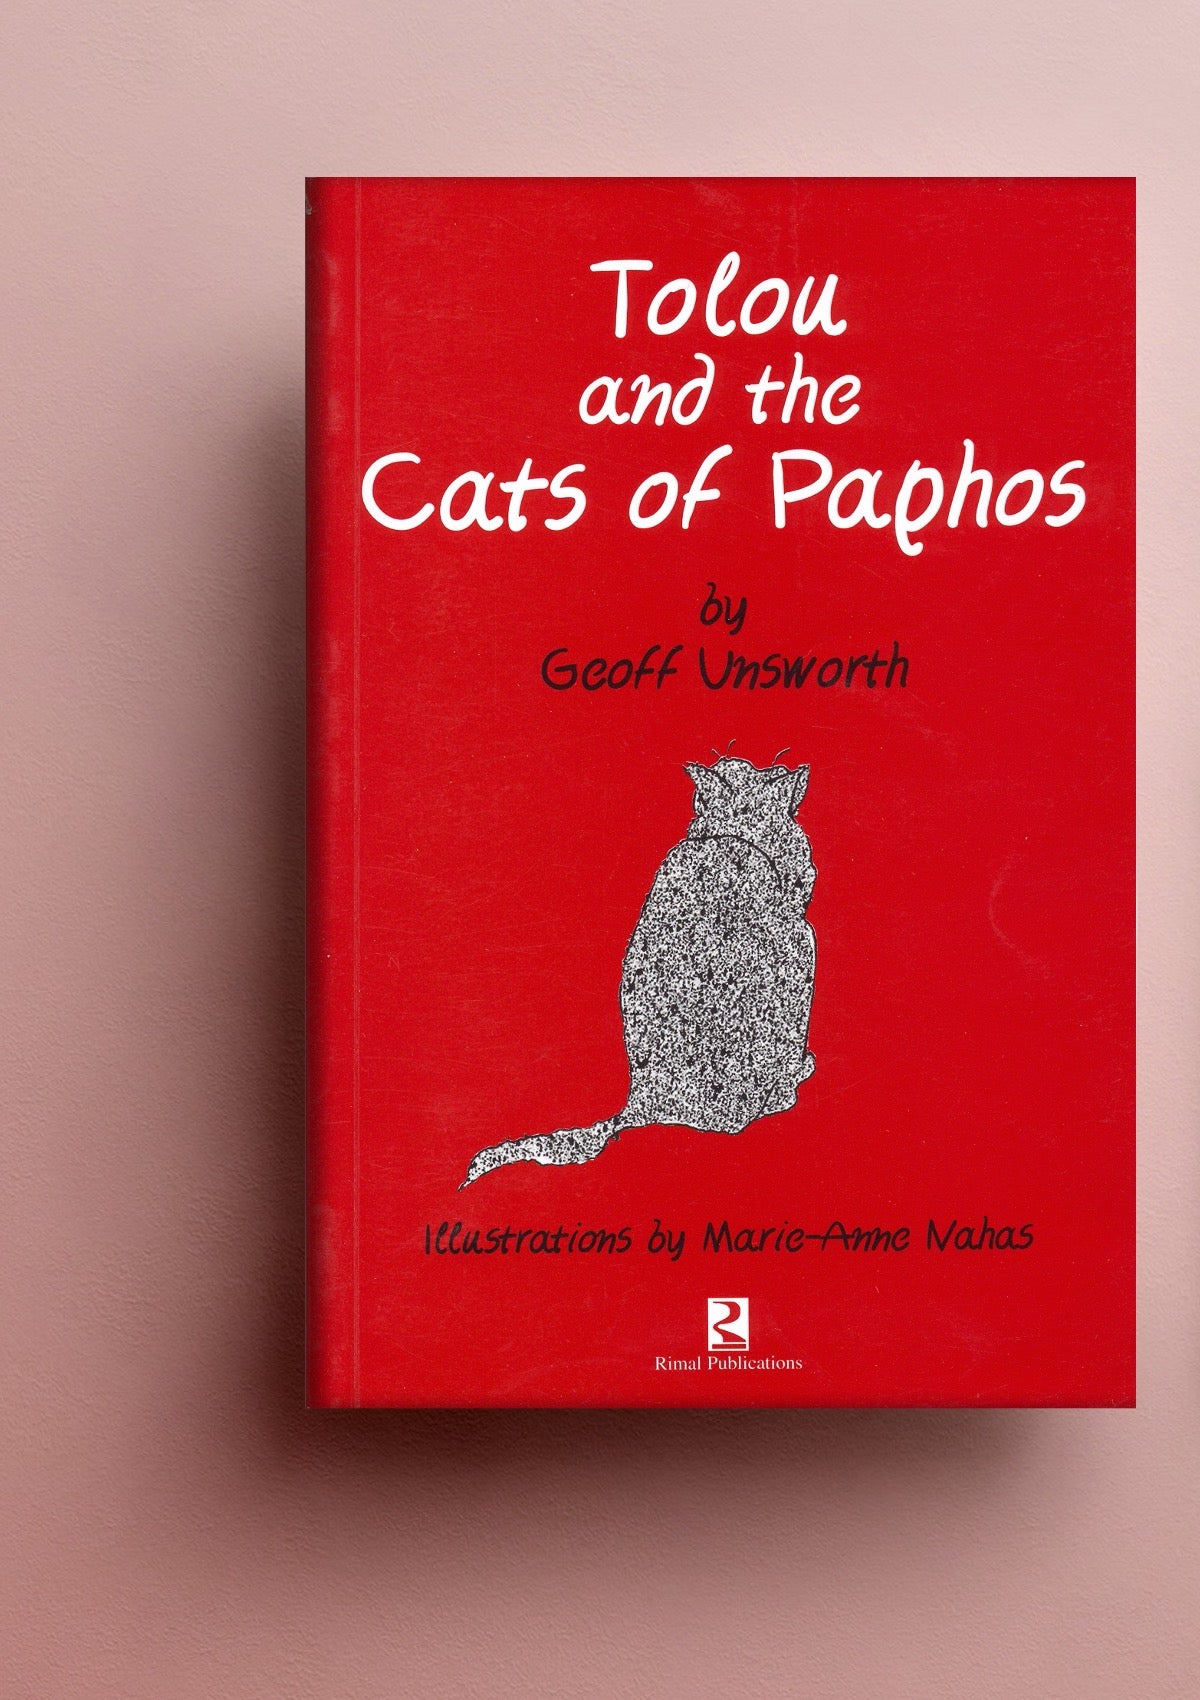 Tolou and the Cats of Paphos